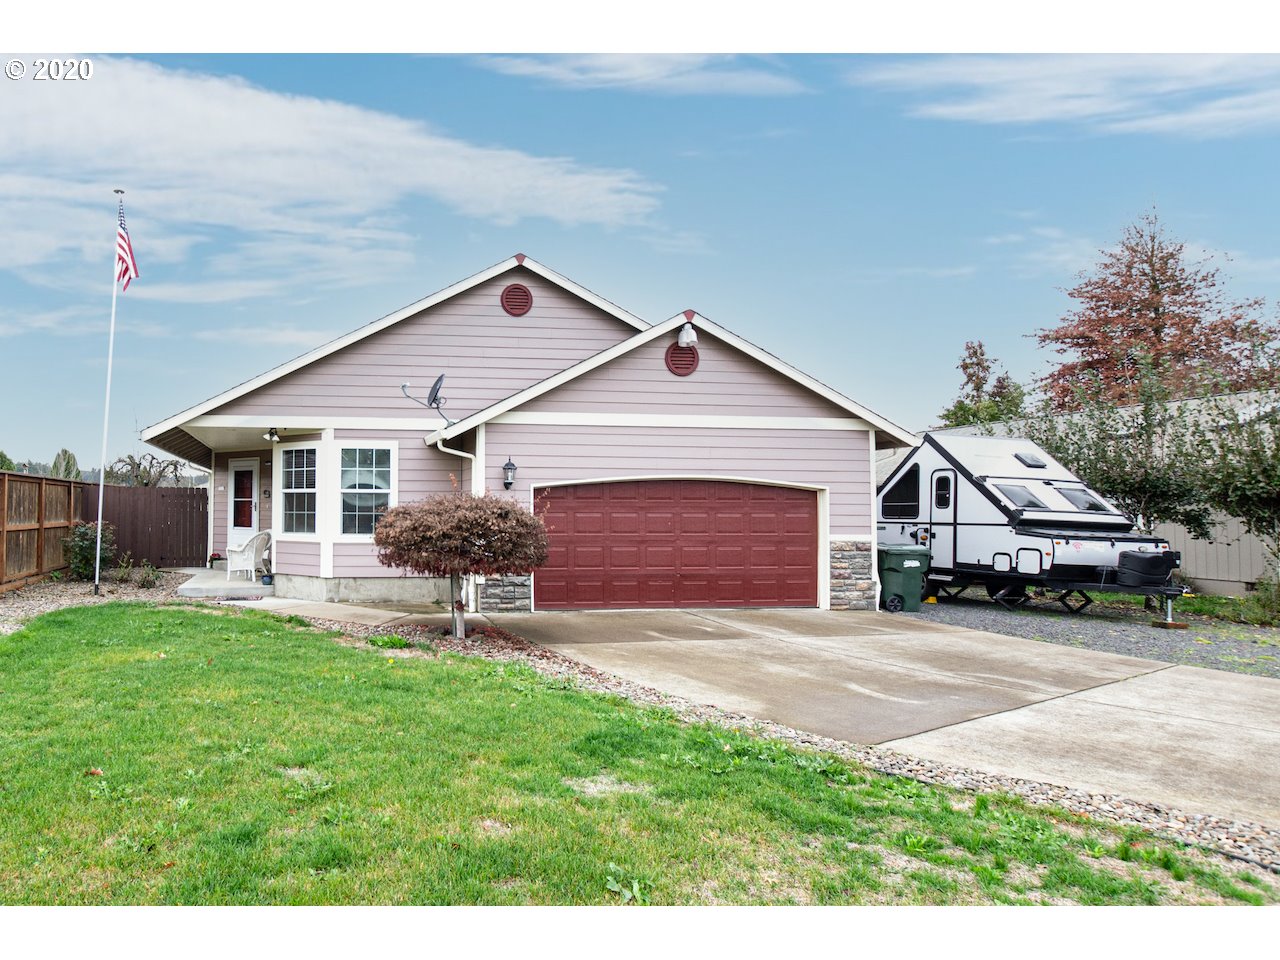 968 23RD CT (1 of 31)